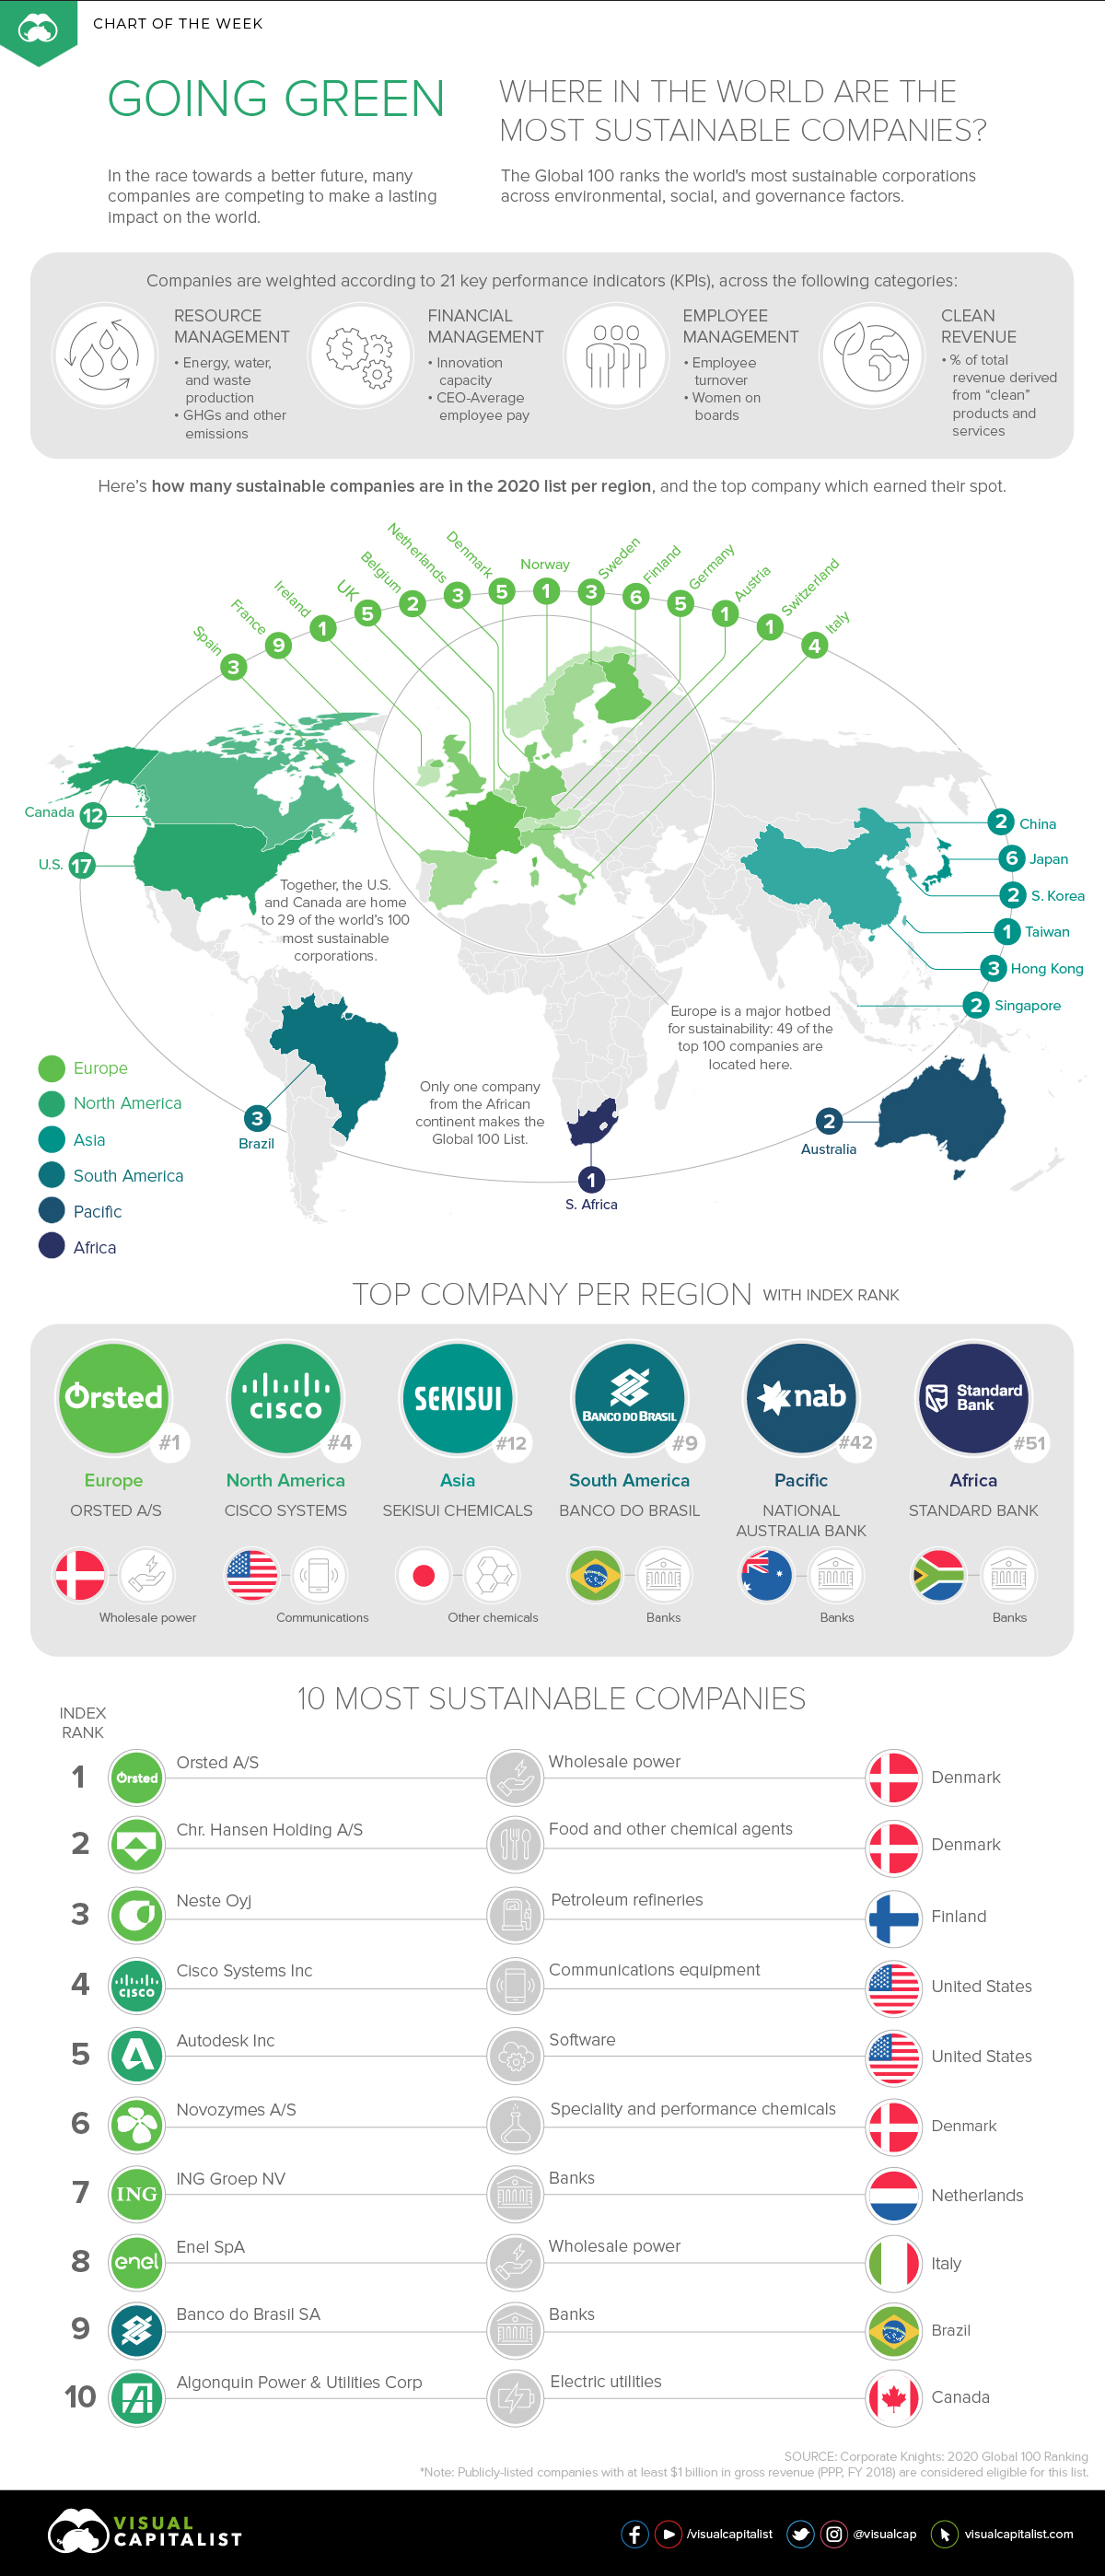 Mapped: Where Are the World's Most Sustainable Companies?